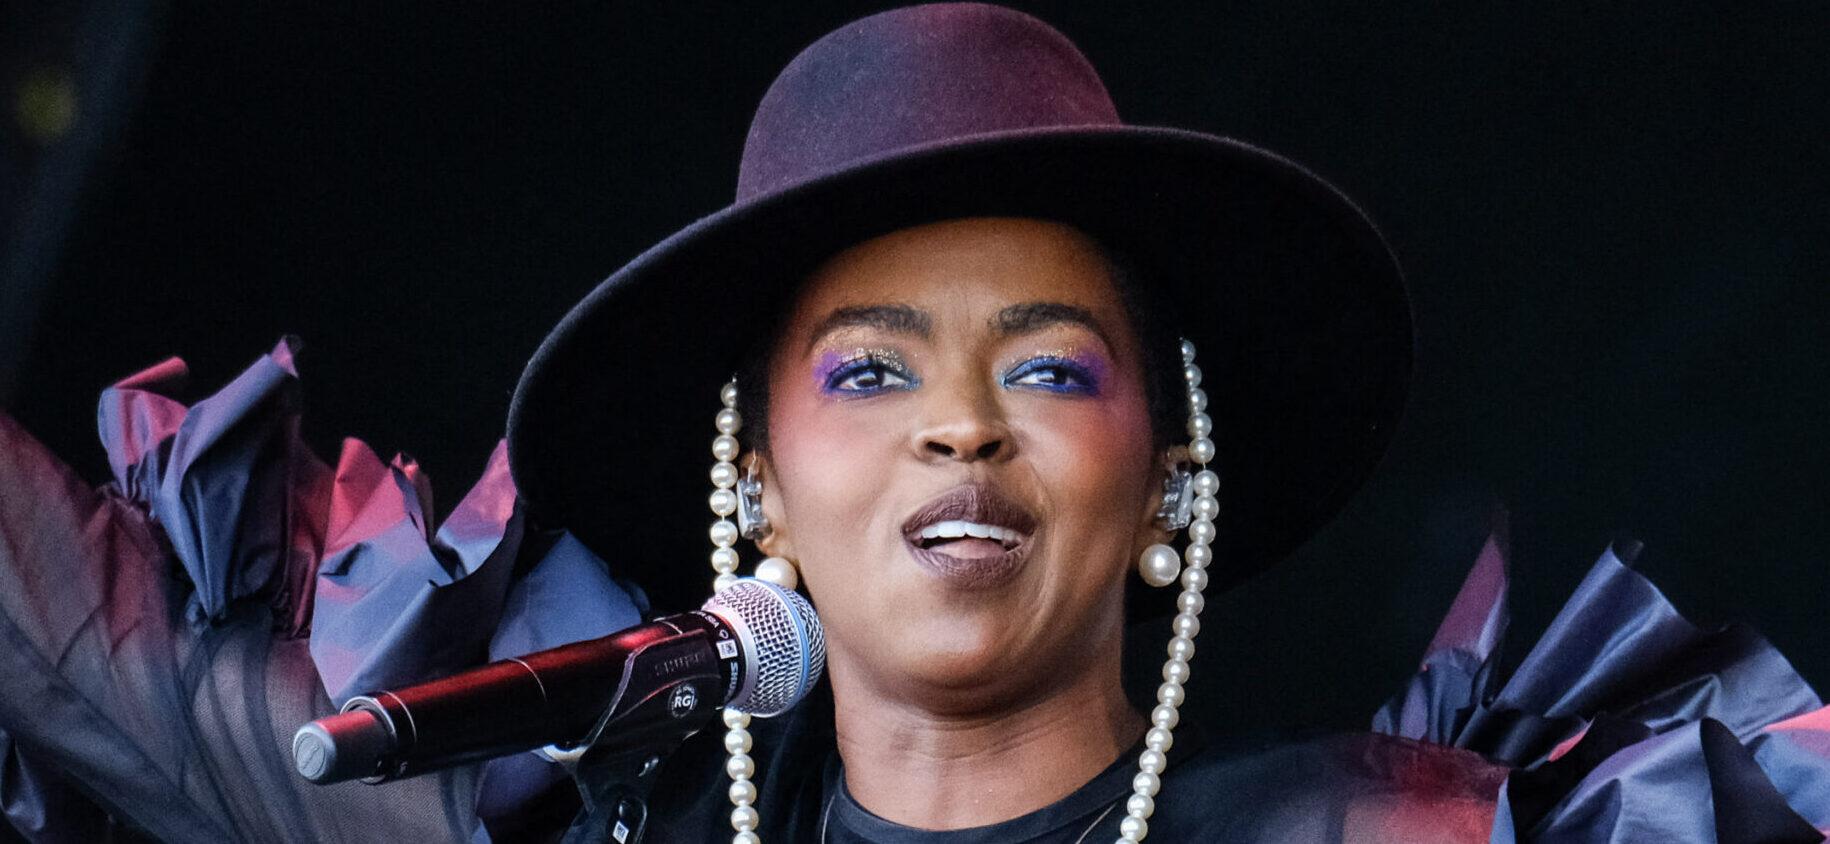 Ms. Lauryn Hill performs on the Pyramid stage at Glastonbury Festival 2019 on Friday 28 June 2019